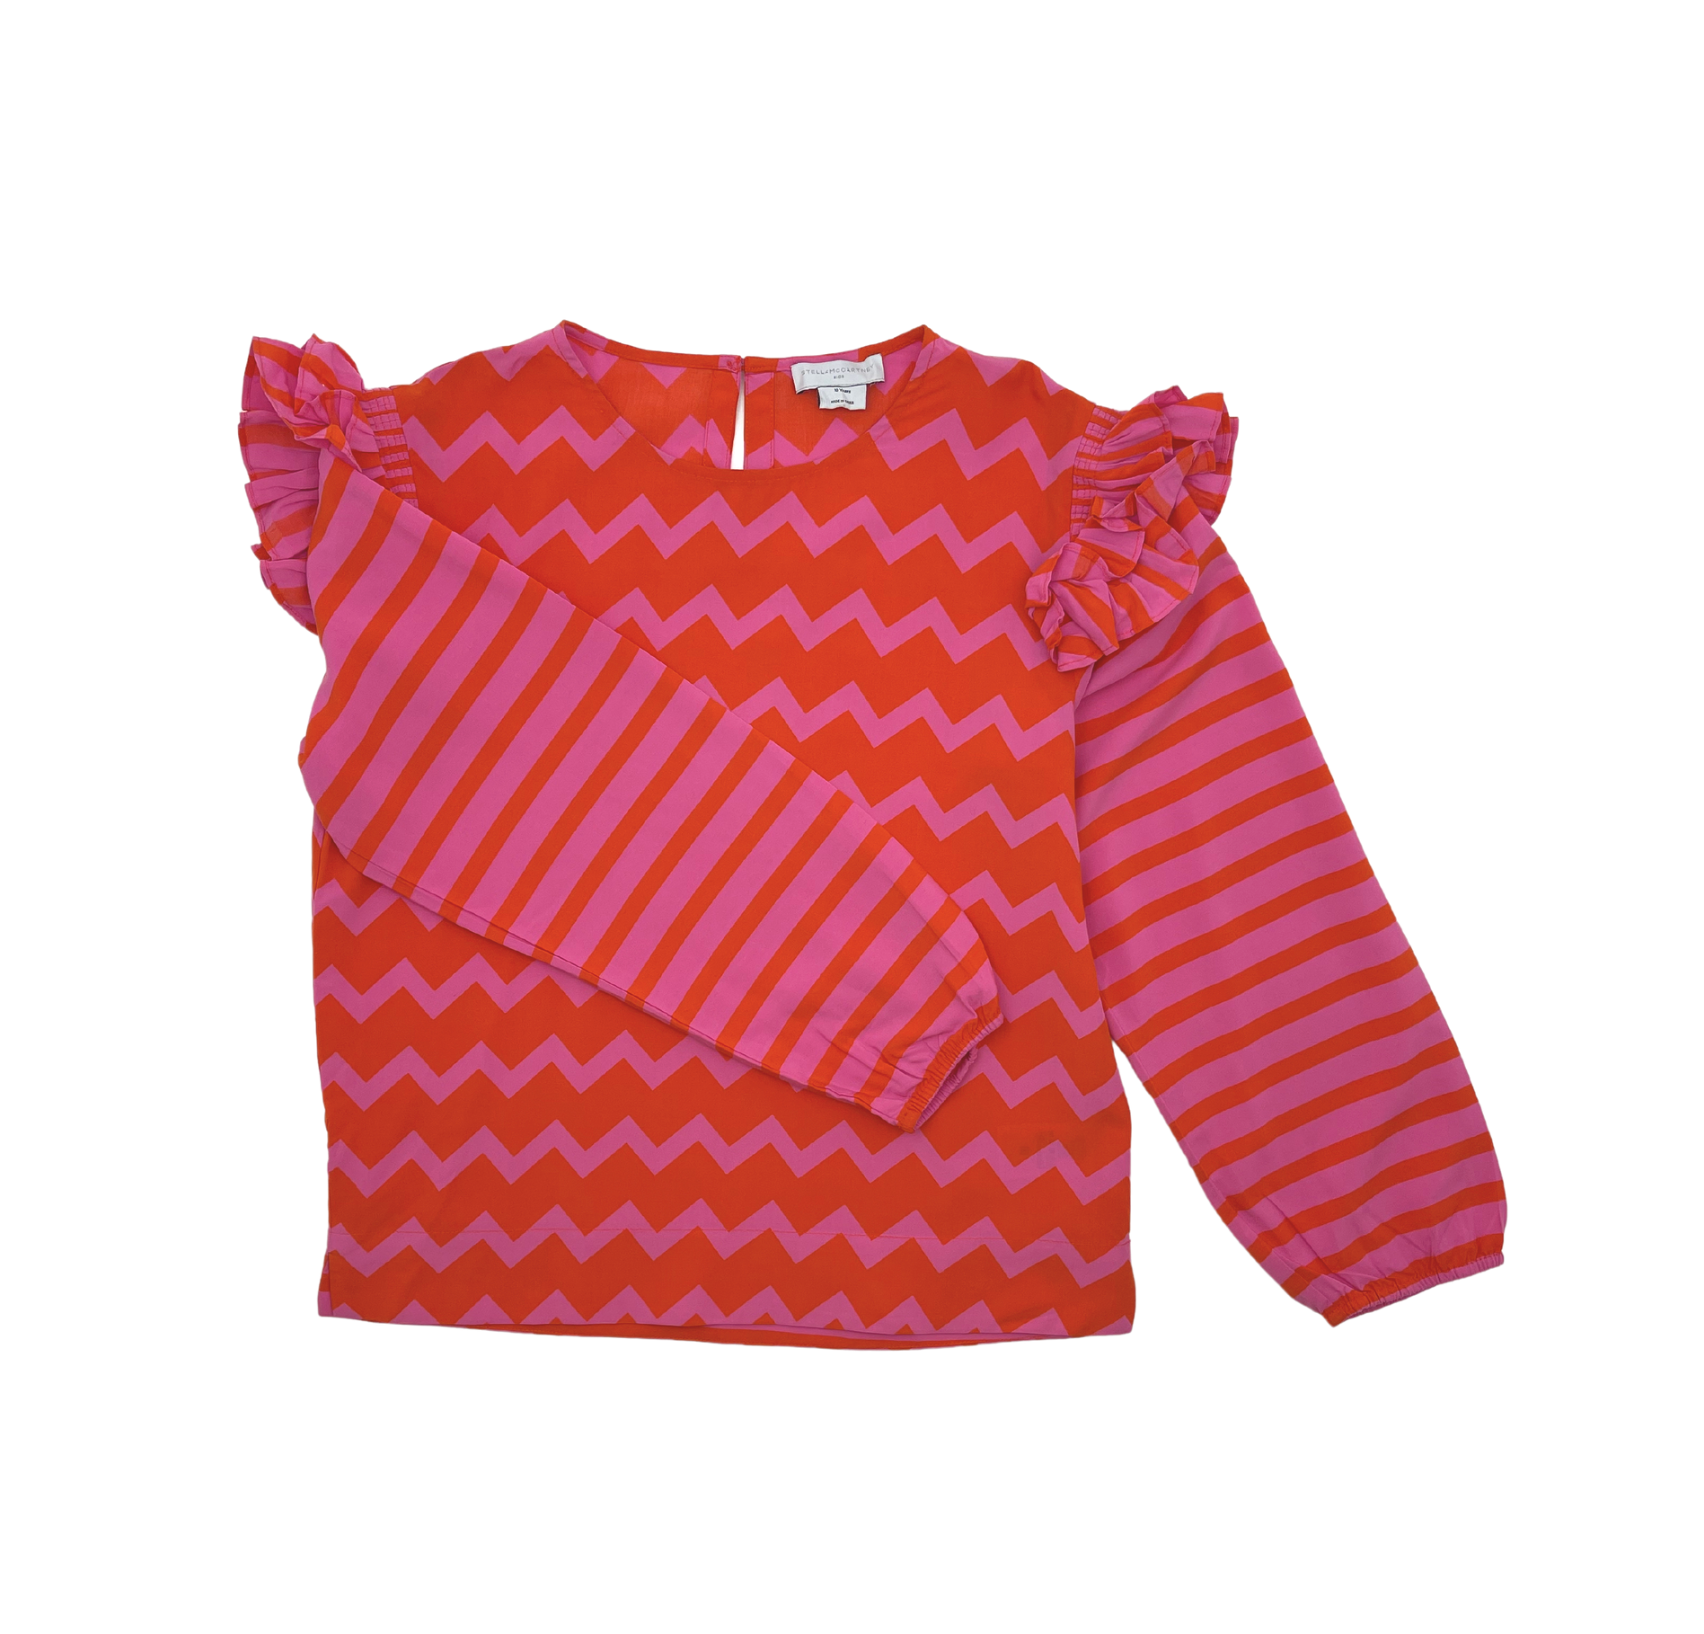 STELLA MCCARTNEY - Red &amp; pink blouse - 10 years old